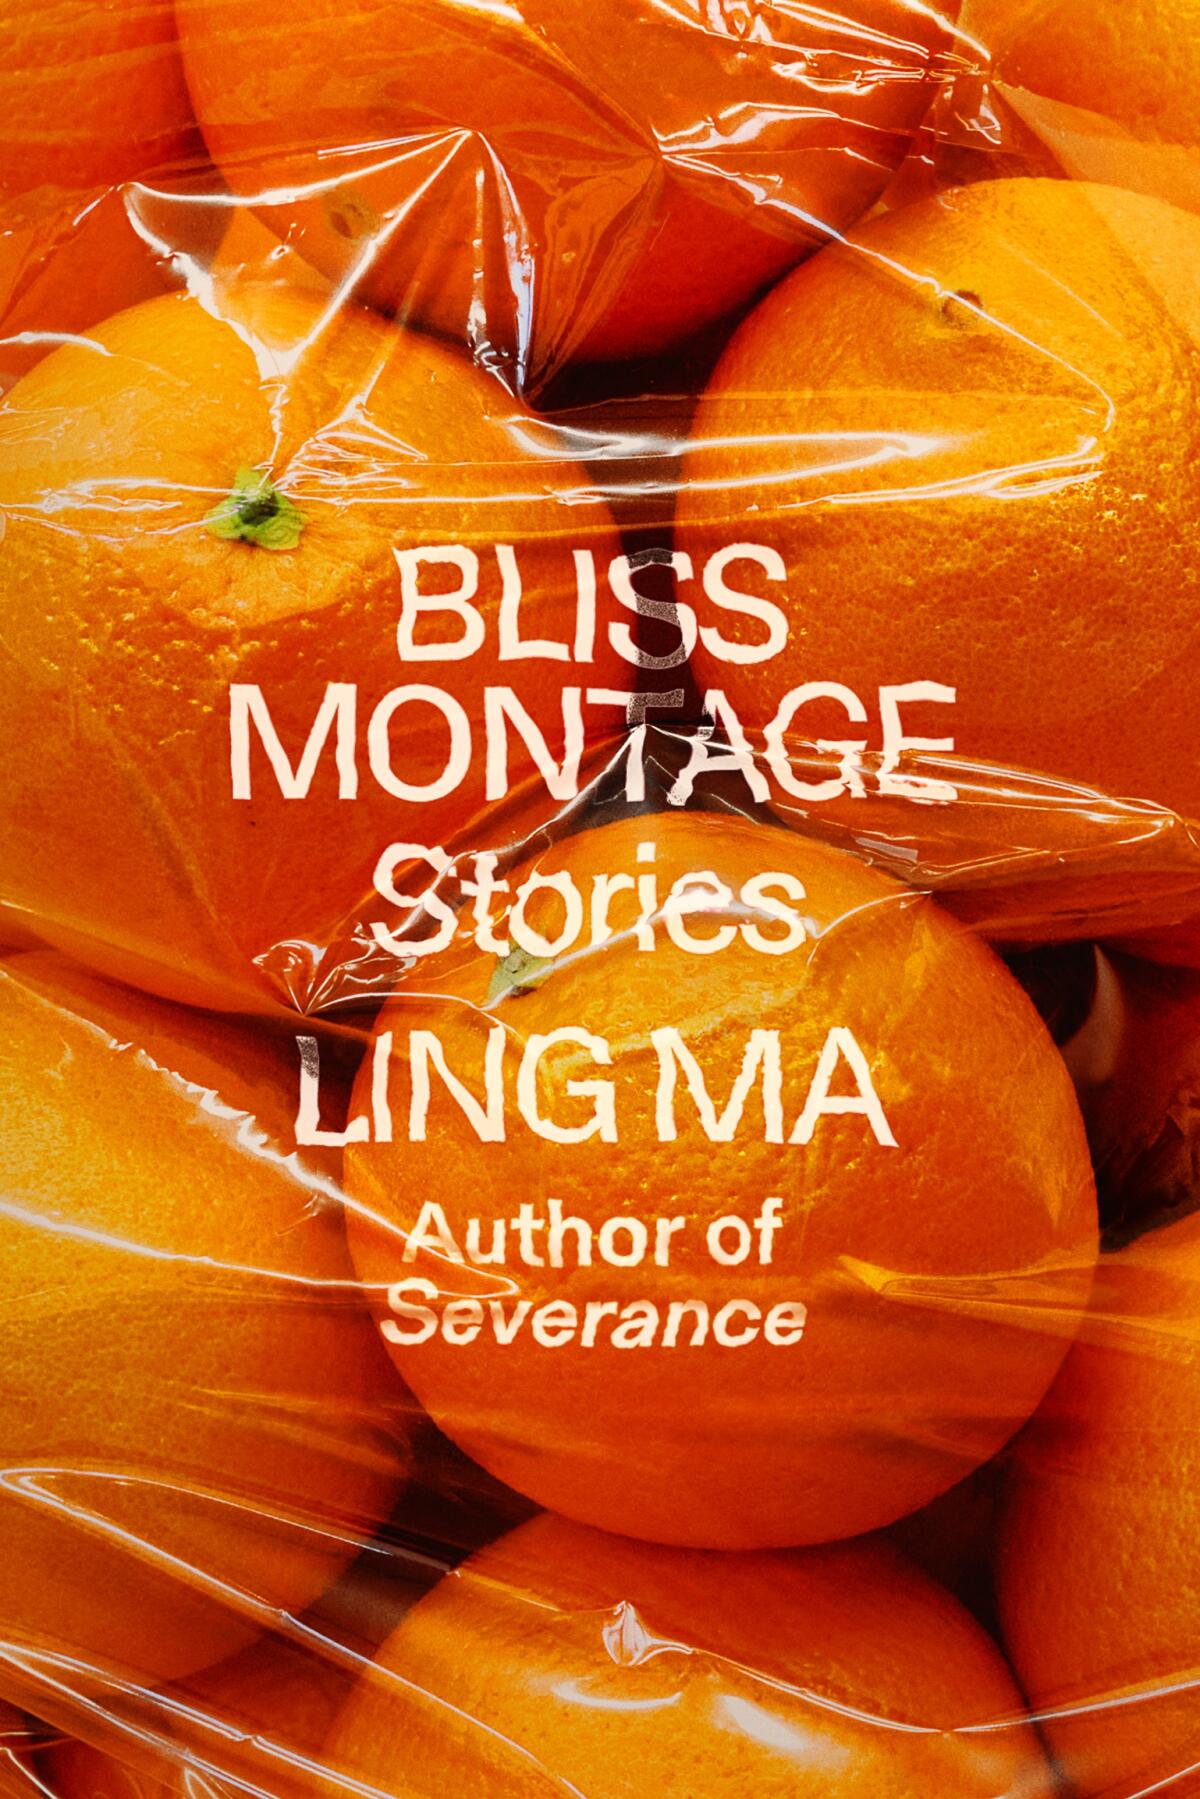 "Bliss Montage: Stories" by Ling Ma